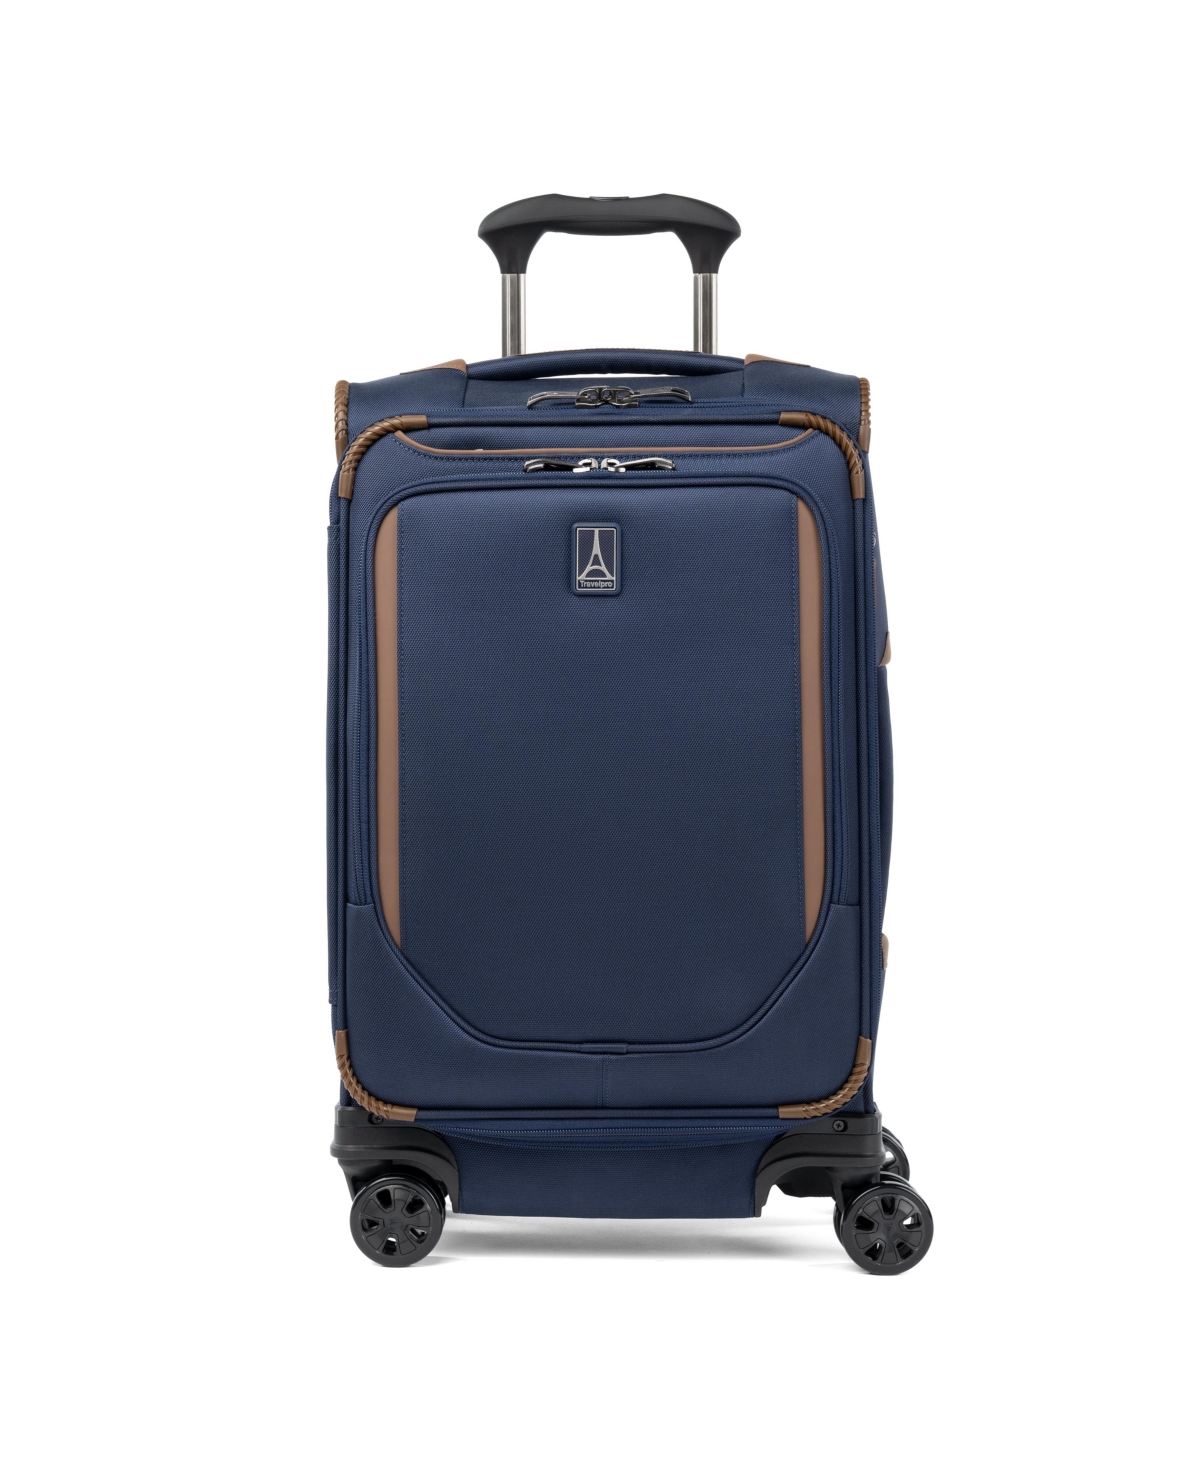 Travelpro Crew Classic Carry-on Expandable Spinner Luggage In Patriot Blue